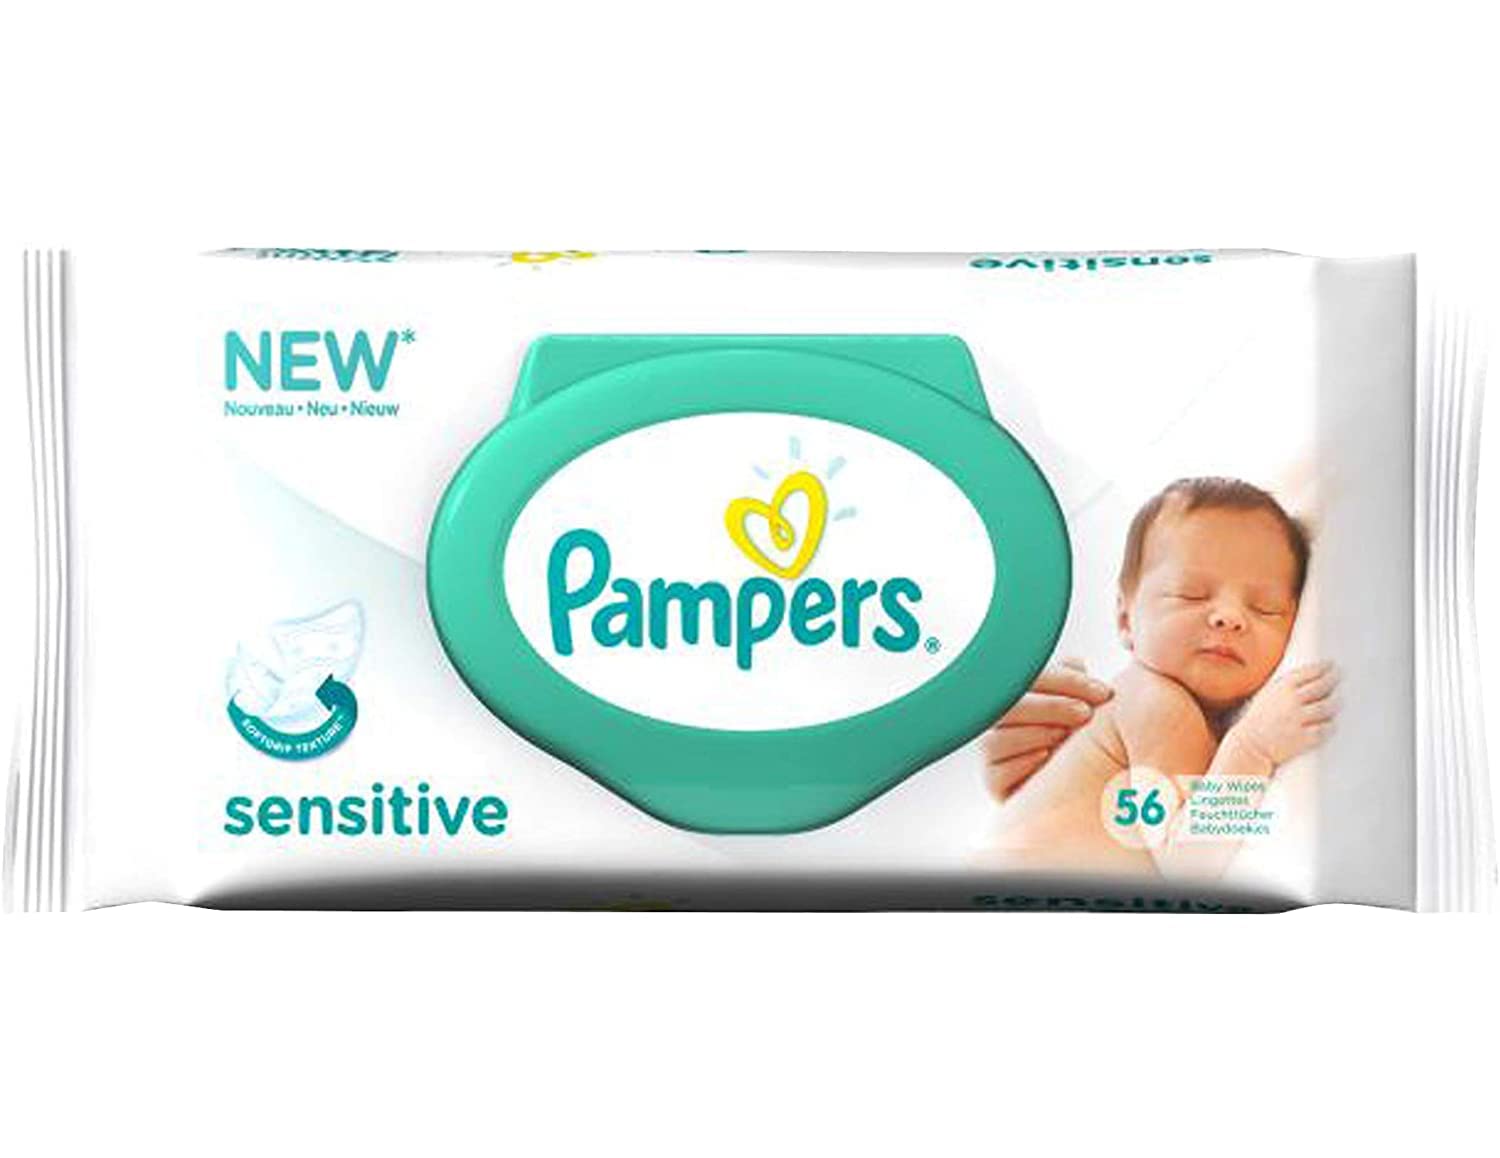 pampers sensitive 56 wipes